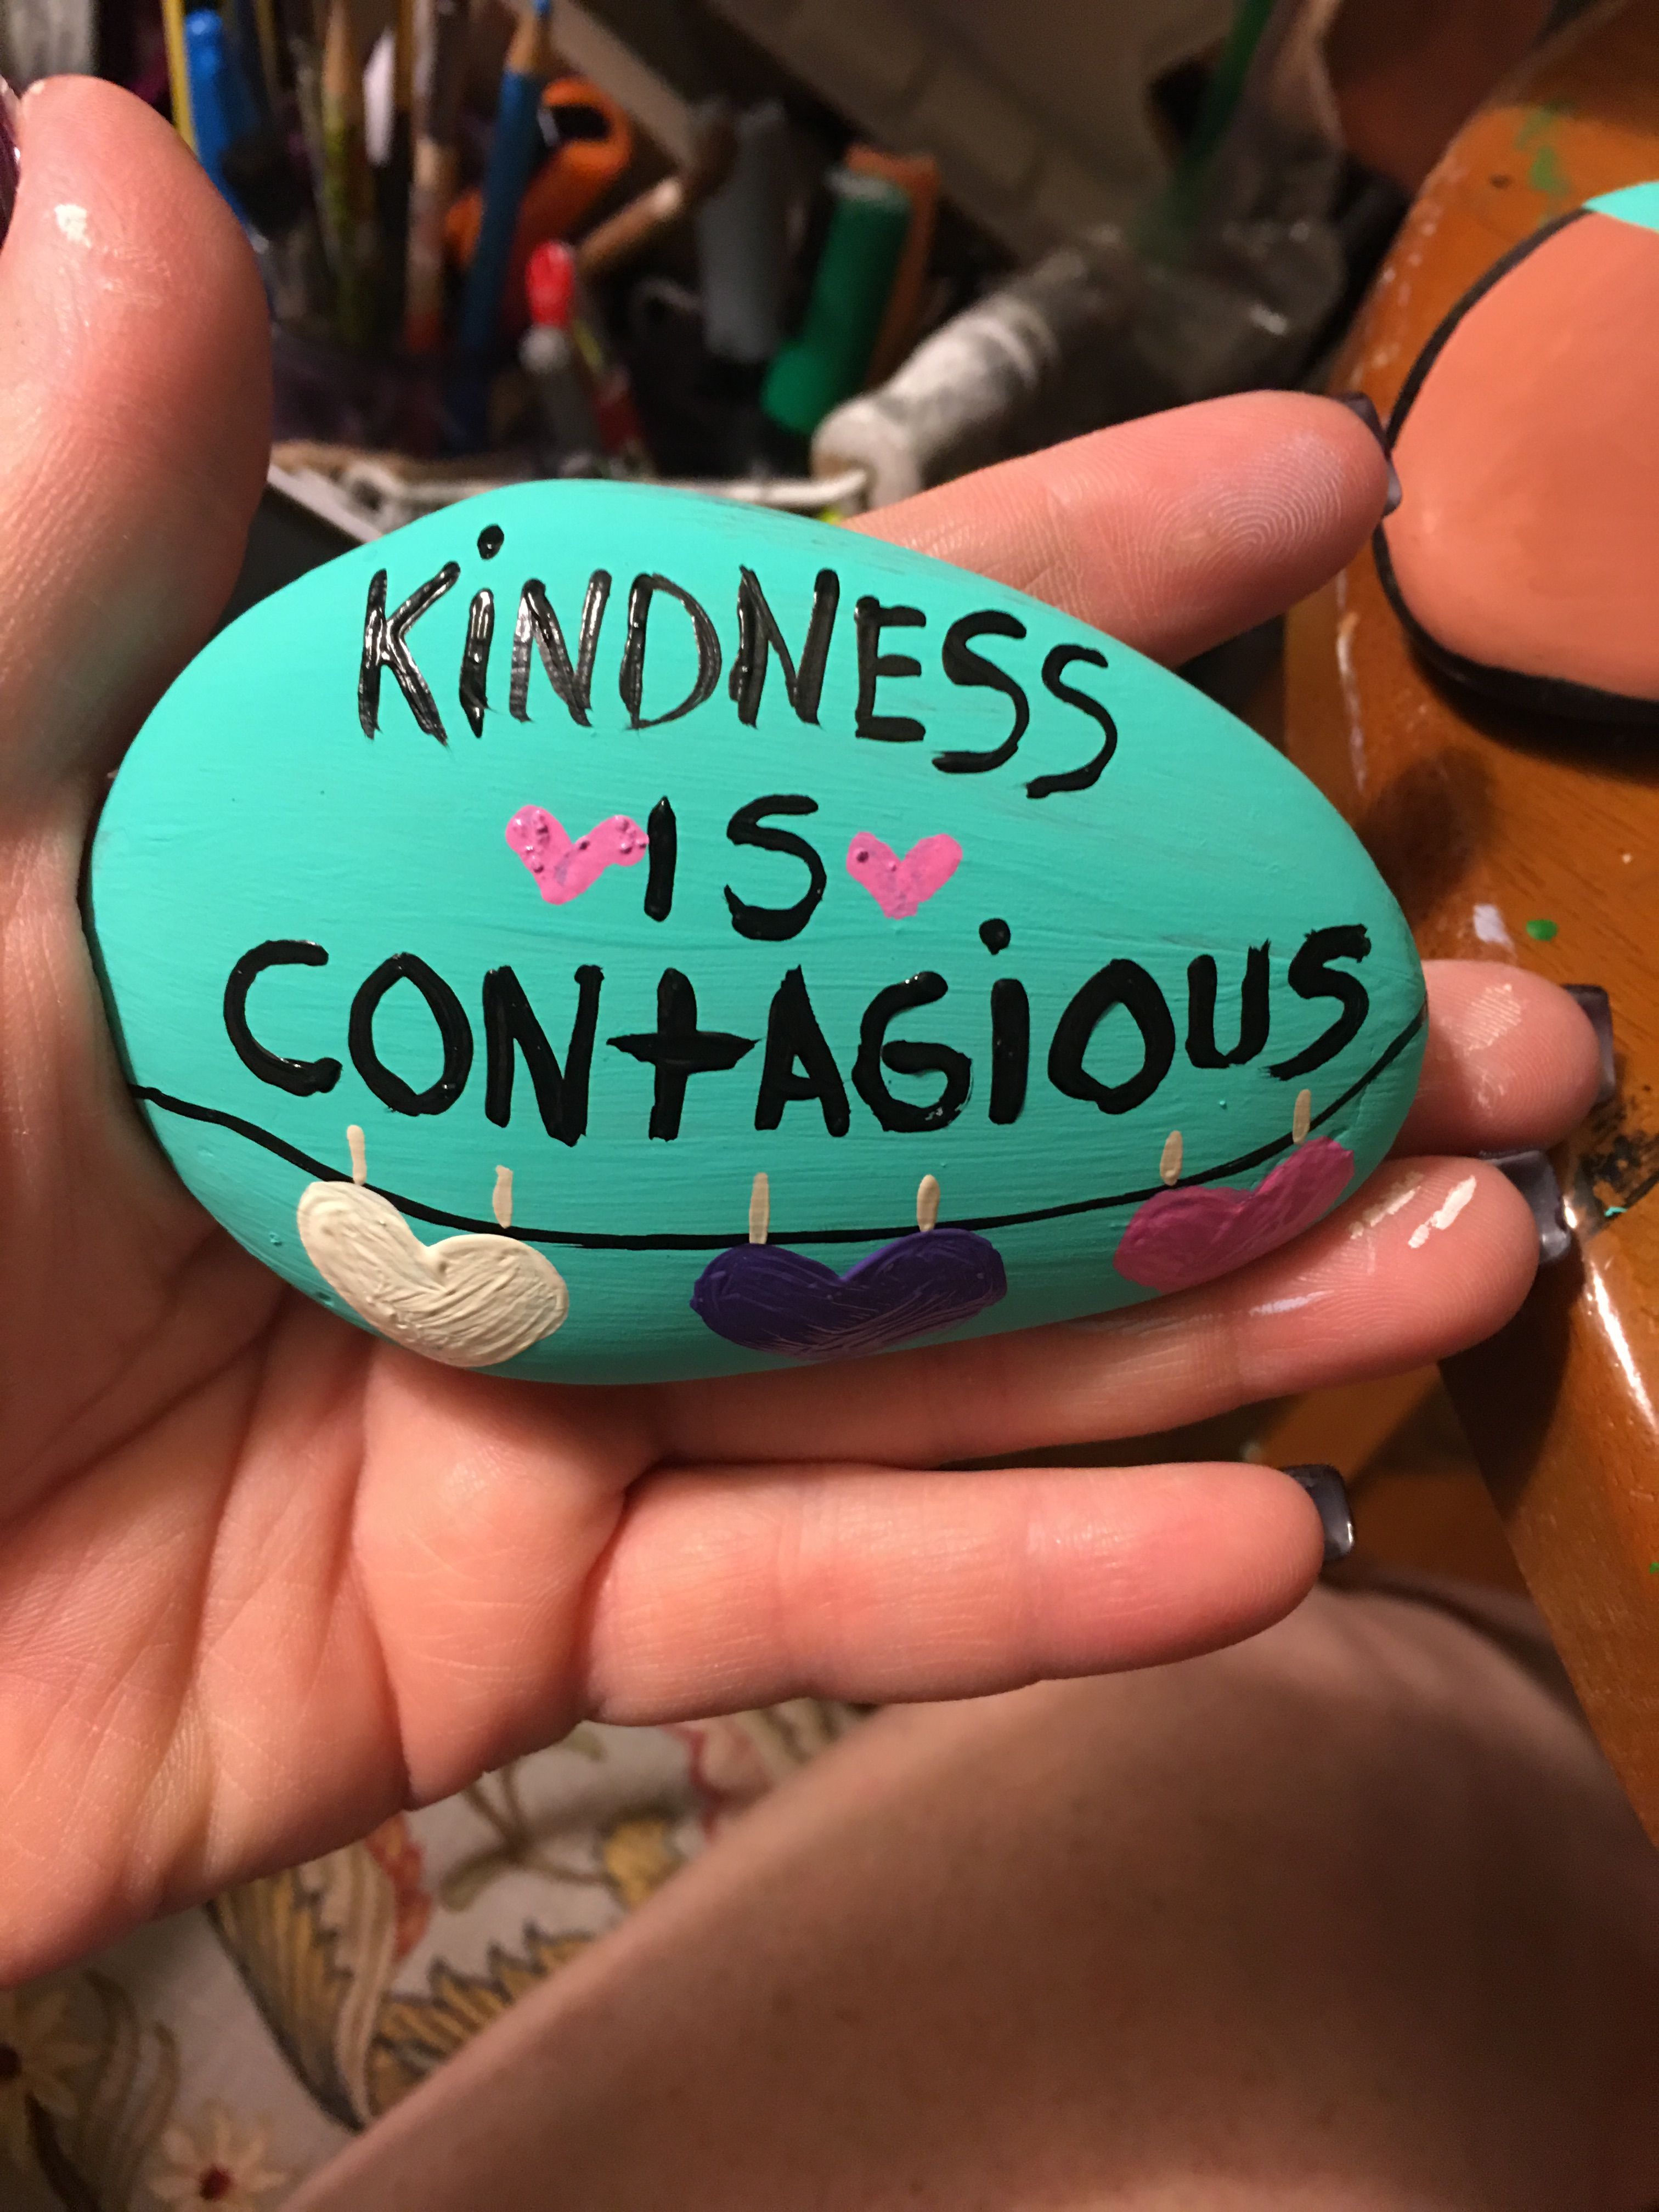 Teal rock with "Kindness is Contagious" written on it